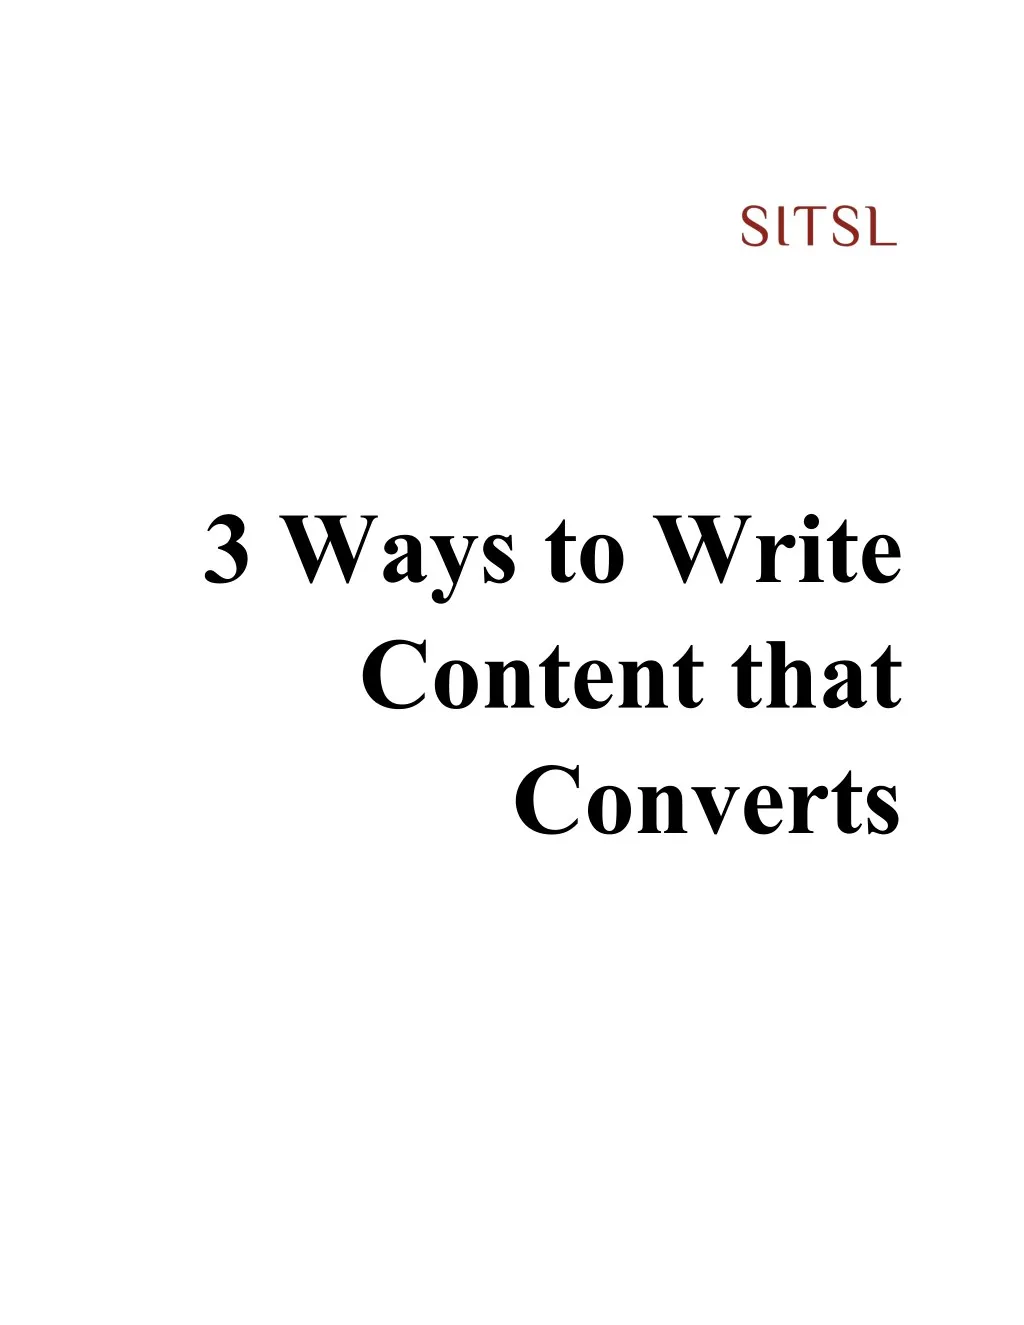 3 ways to write content that converts